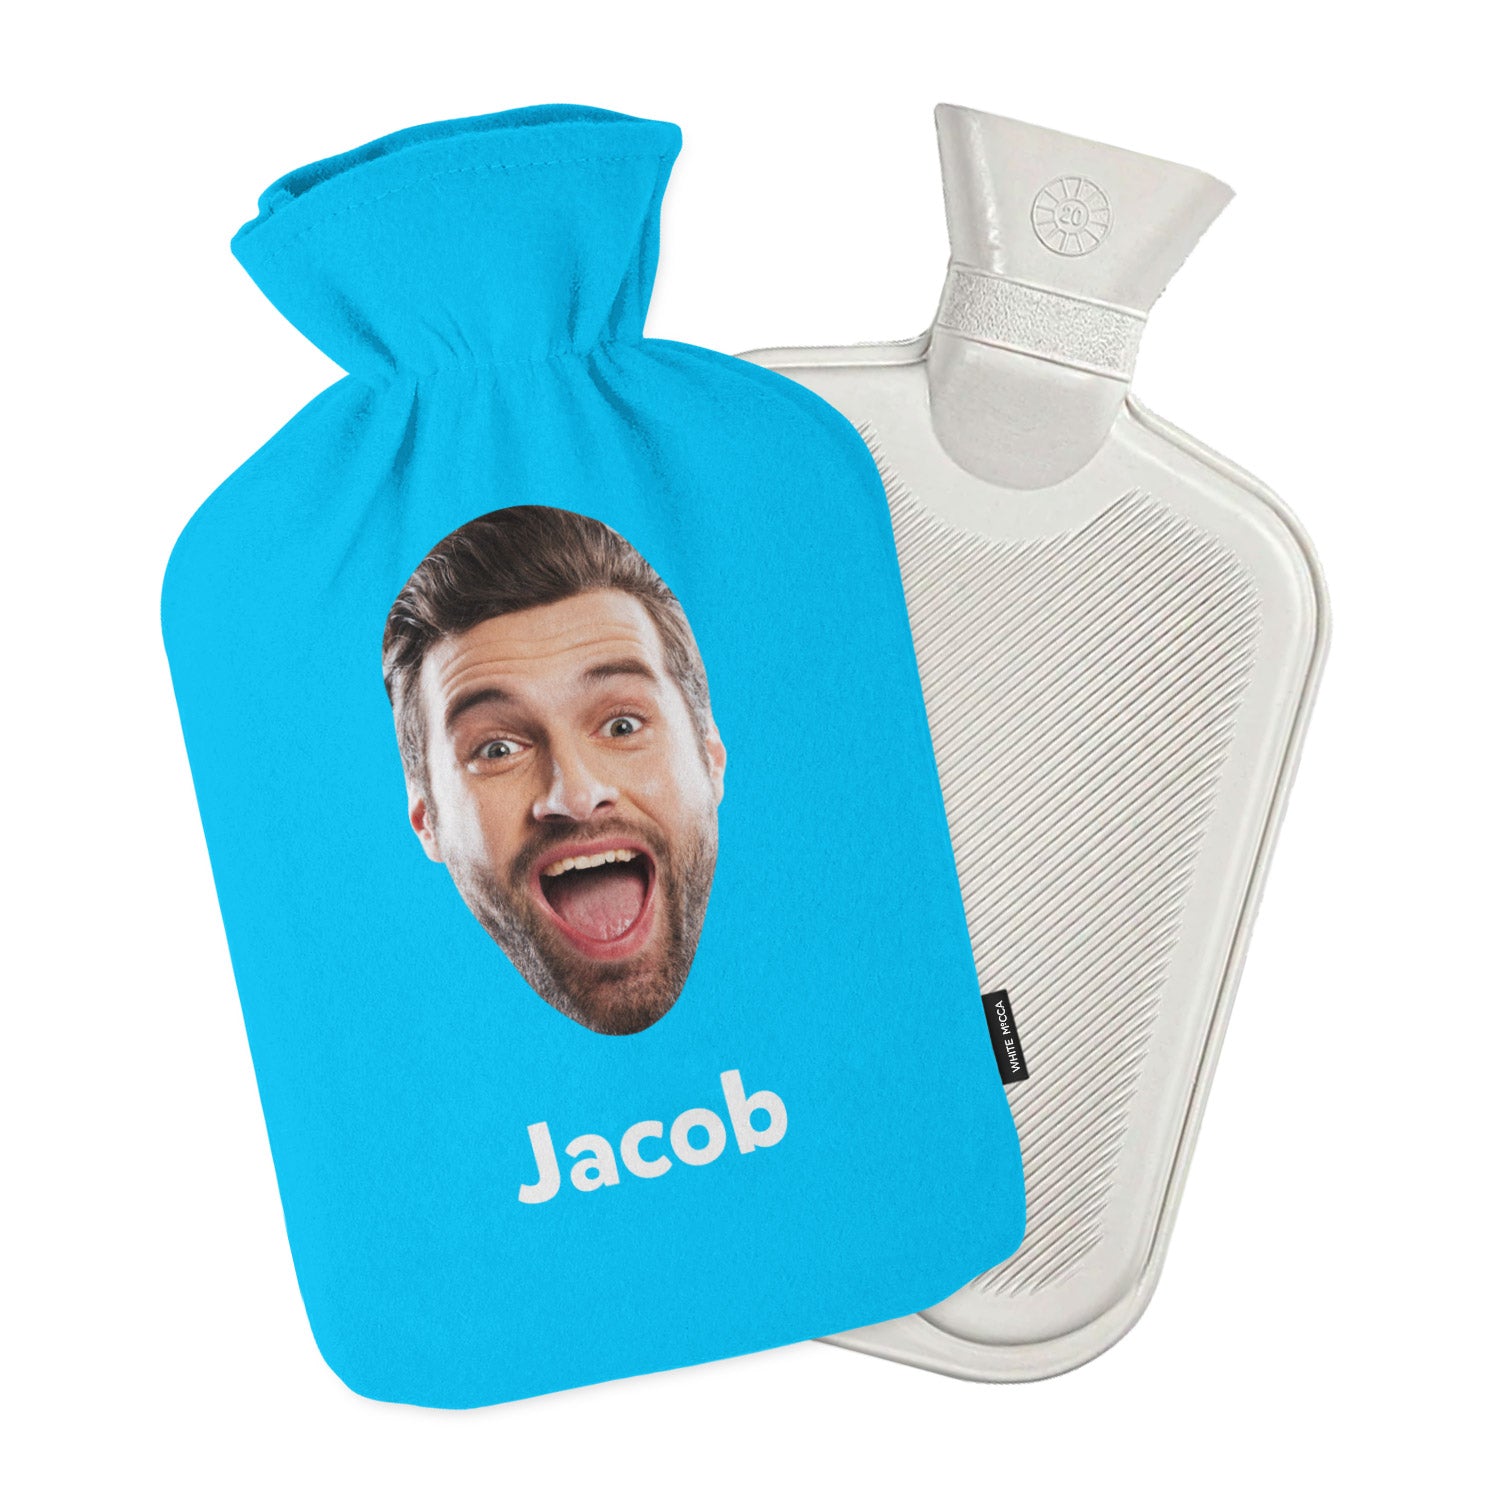 Face & Name Personalised Hot Water Bottle